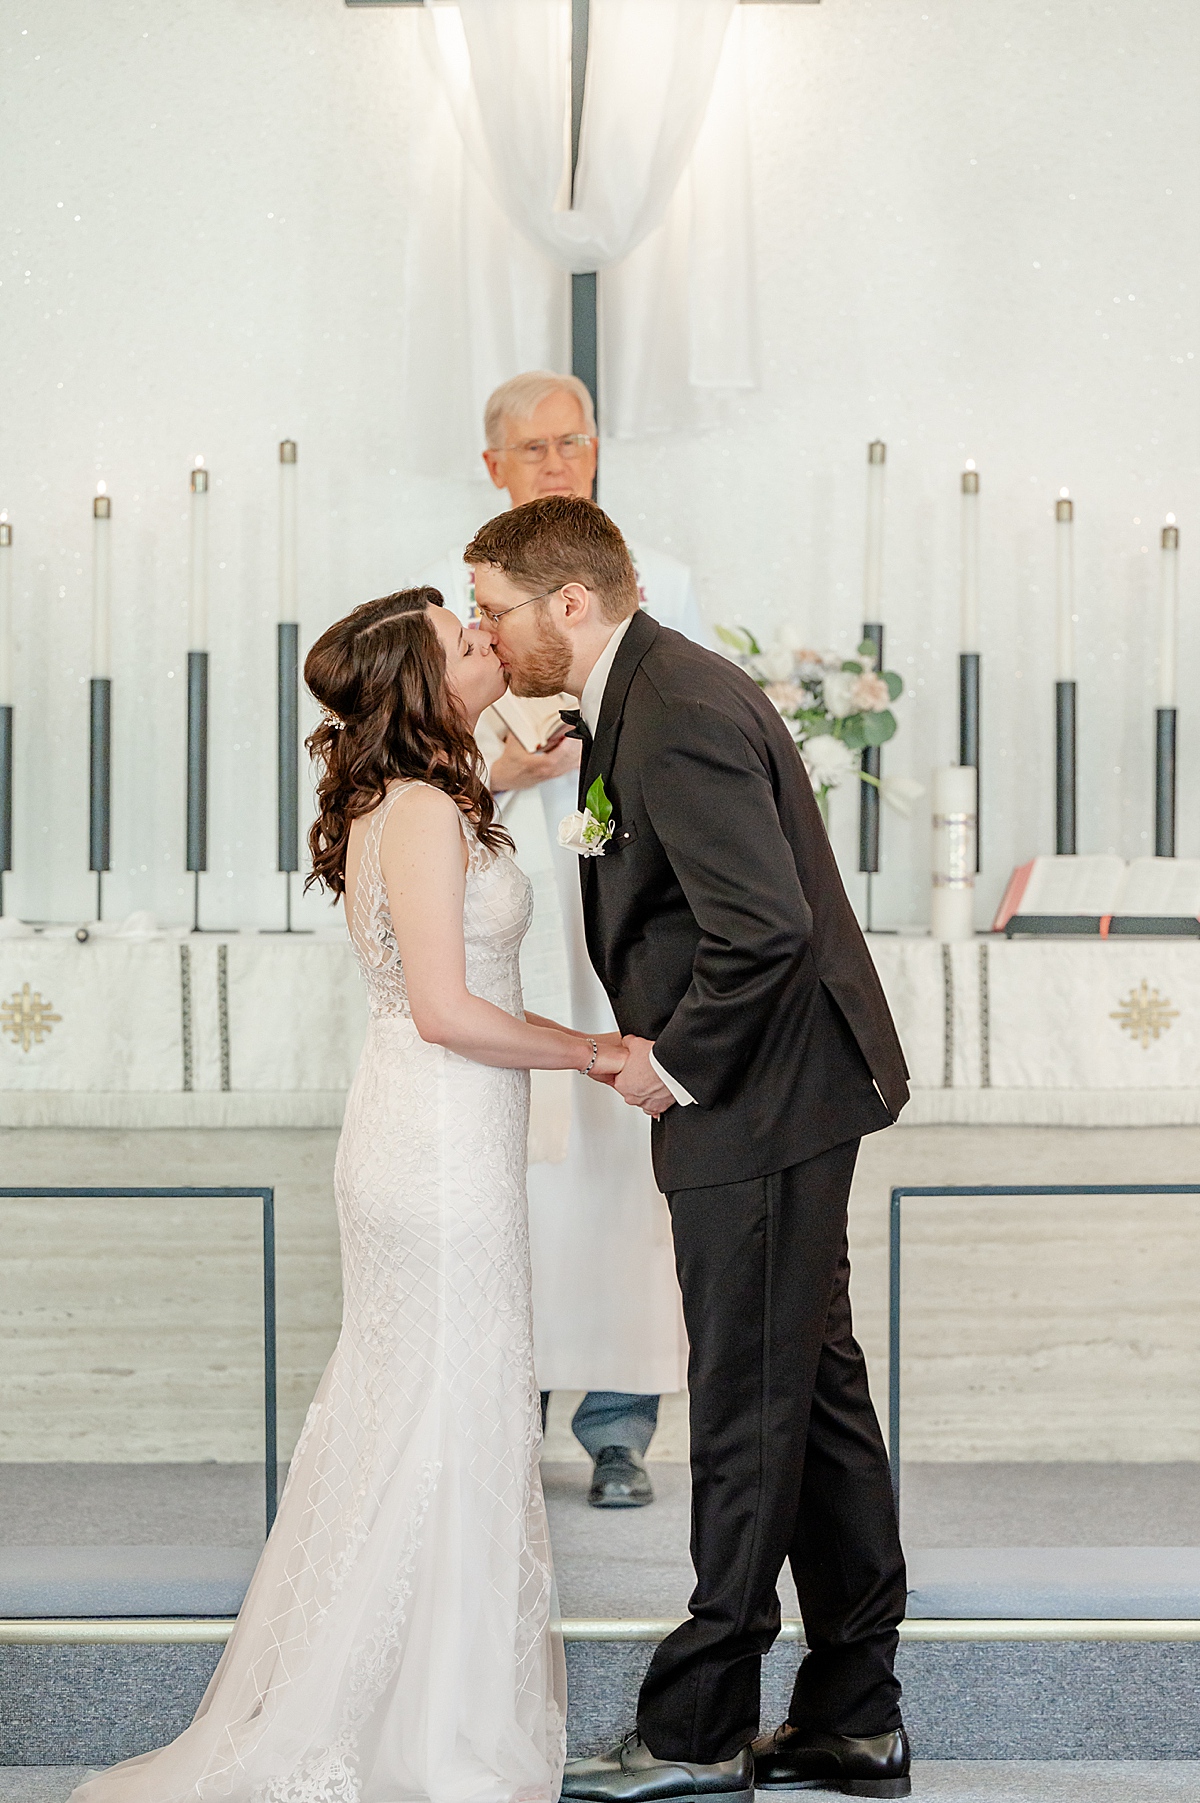 Bride and groom's first kiss.